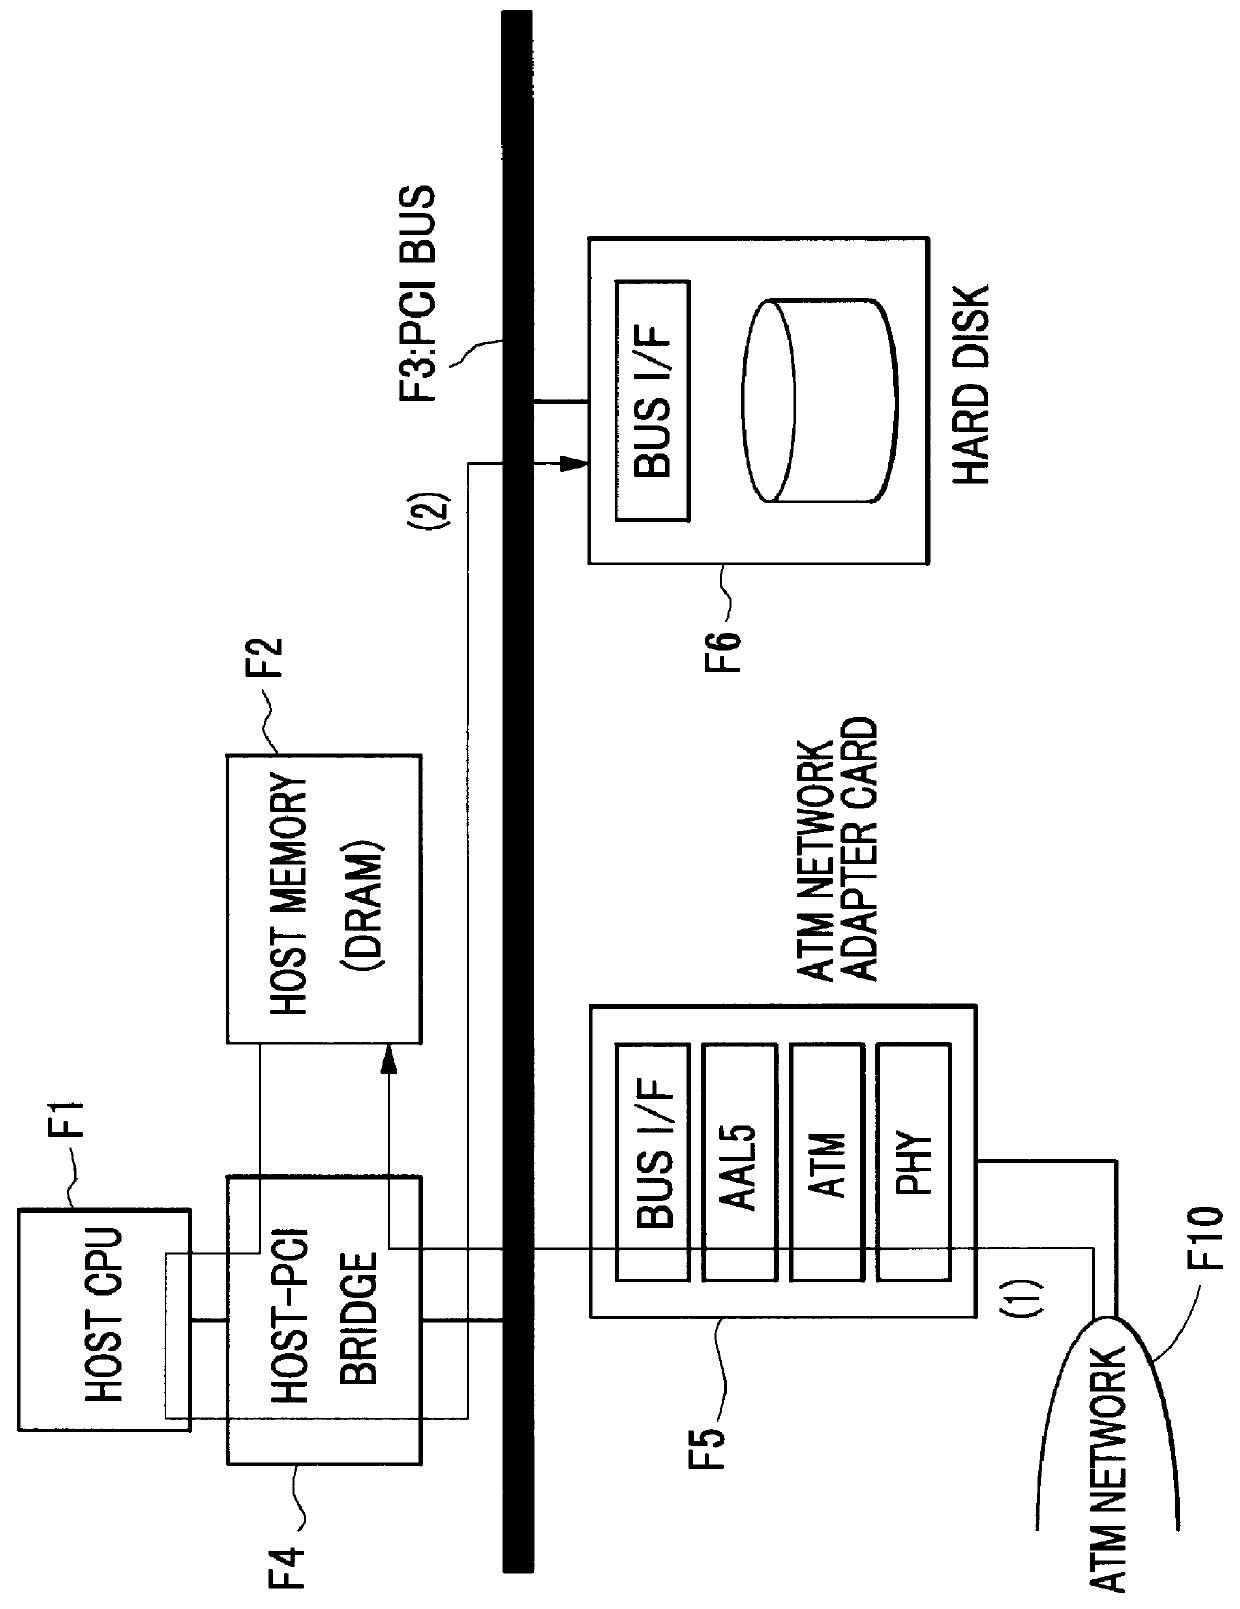 High-speed batch file transfer method and apparatus, and storage medium in which a program for executing the transfer is stored